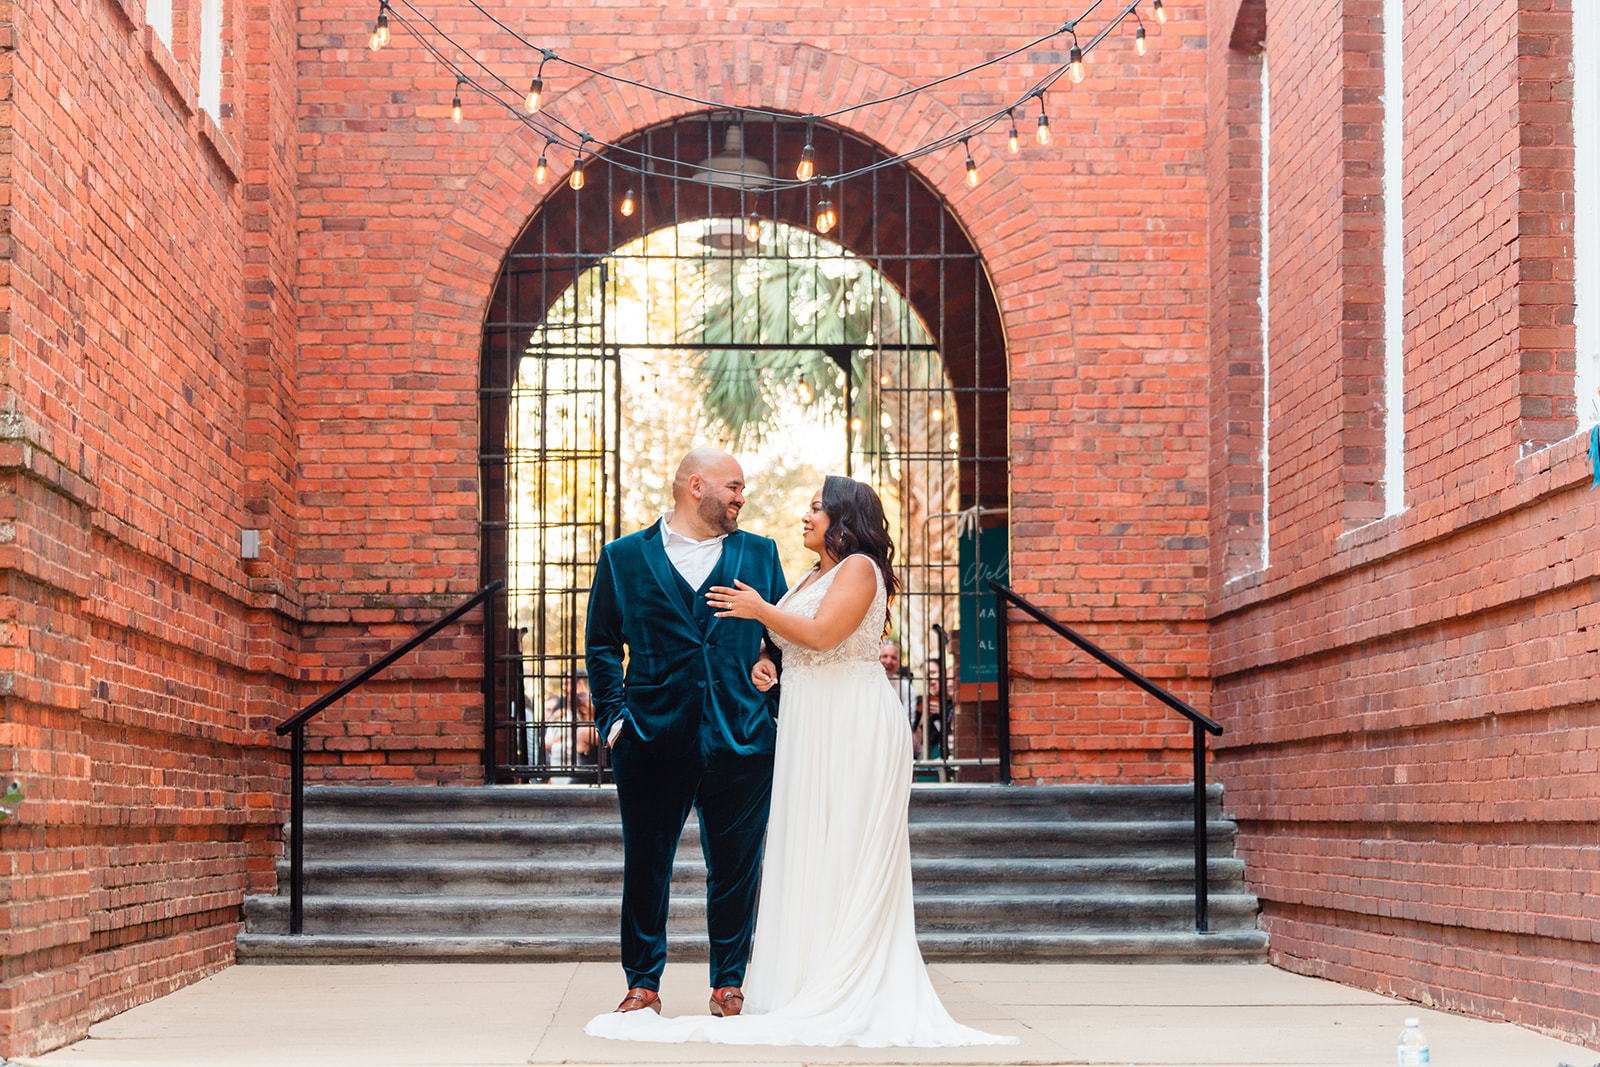 Newlyweds at the brick archway leading to the ceremony area at Venue 1902, looking into each other's eyes with love, captured by Jerzy Nieves Photography.